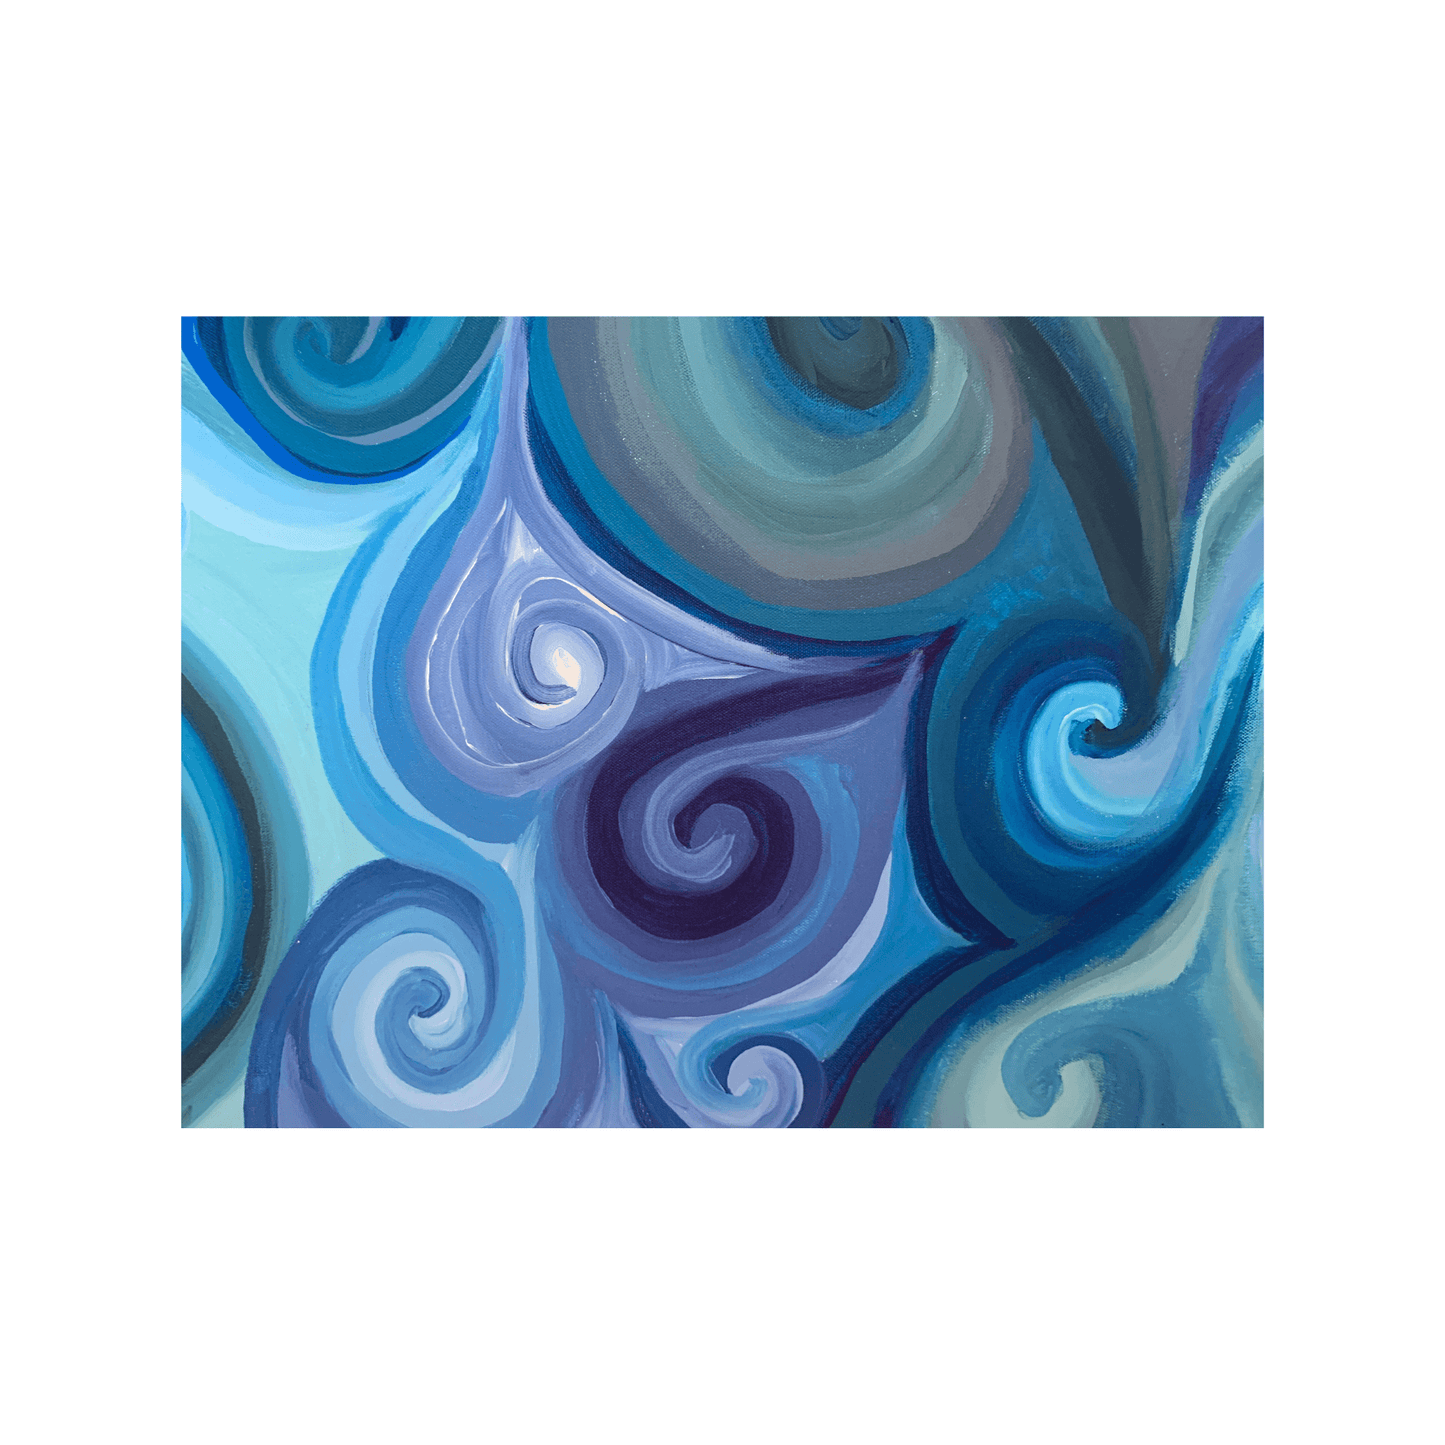 HUES OF BLUE- Abstract Blue Swirl Art